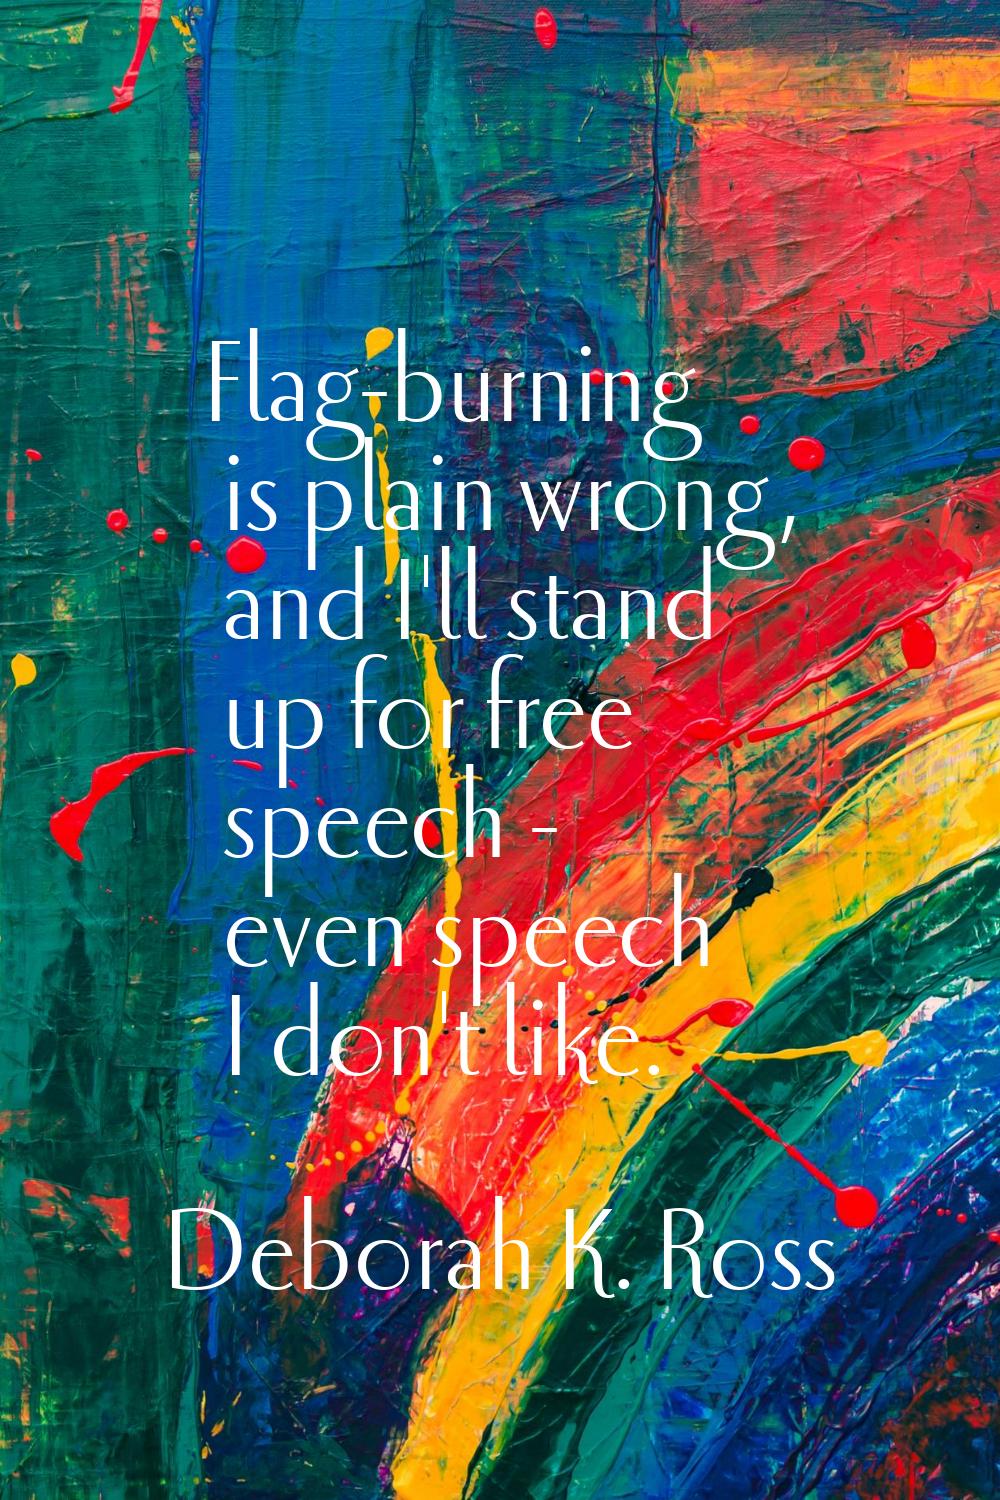 Flag-burning is plain wrong, and I'll stand up for free speech - even speech I don't like.